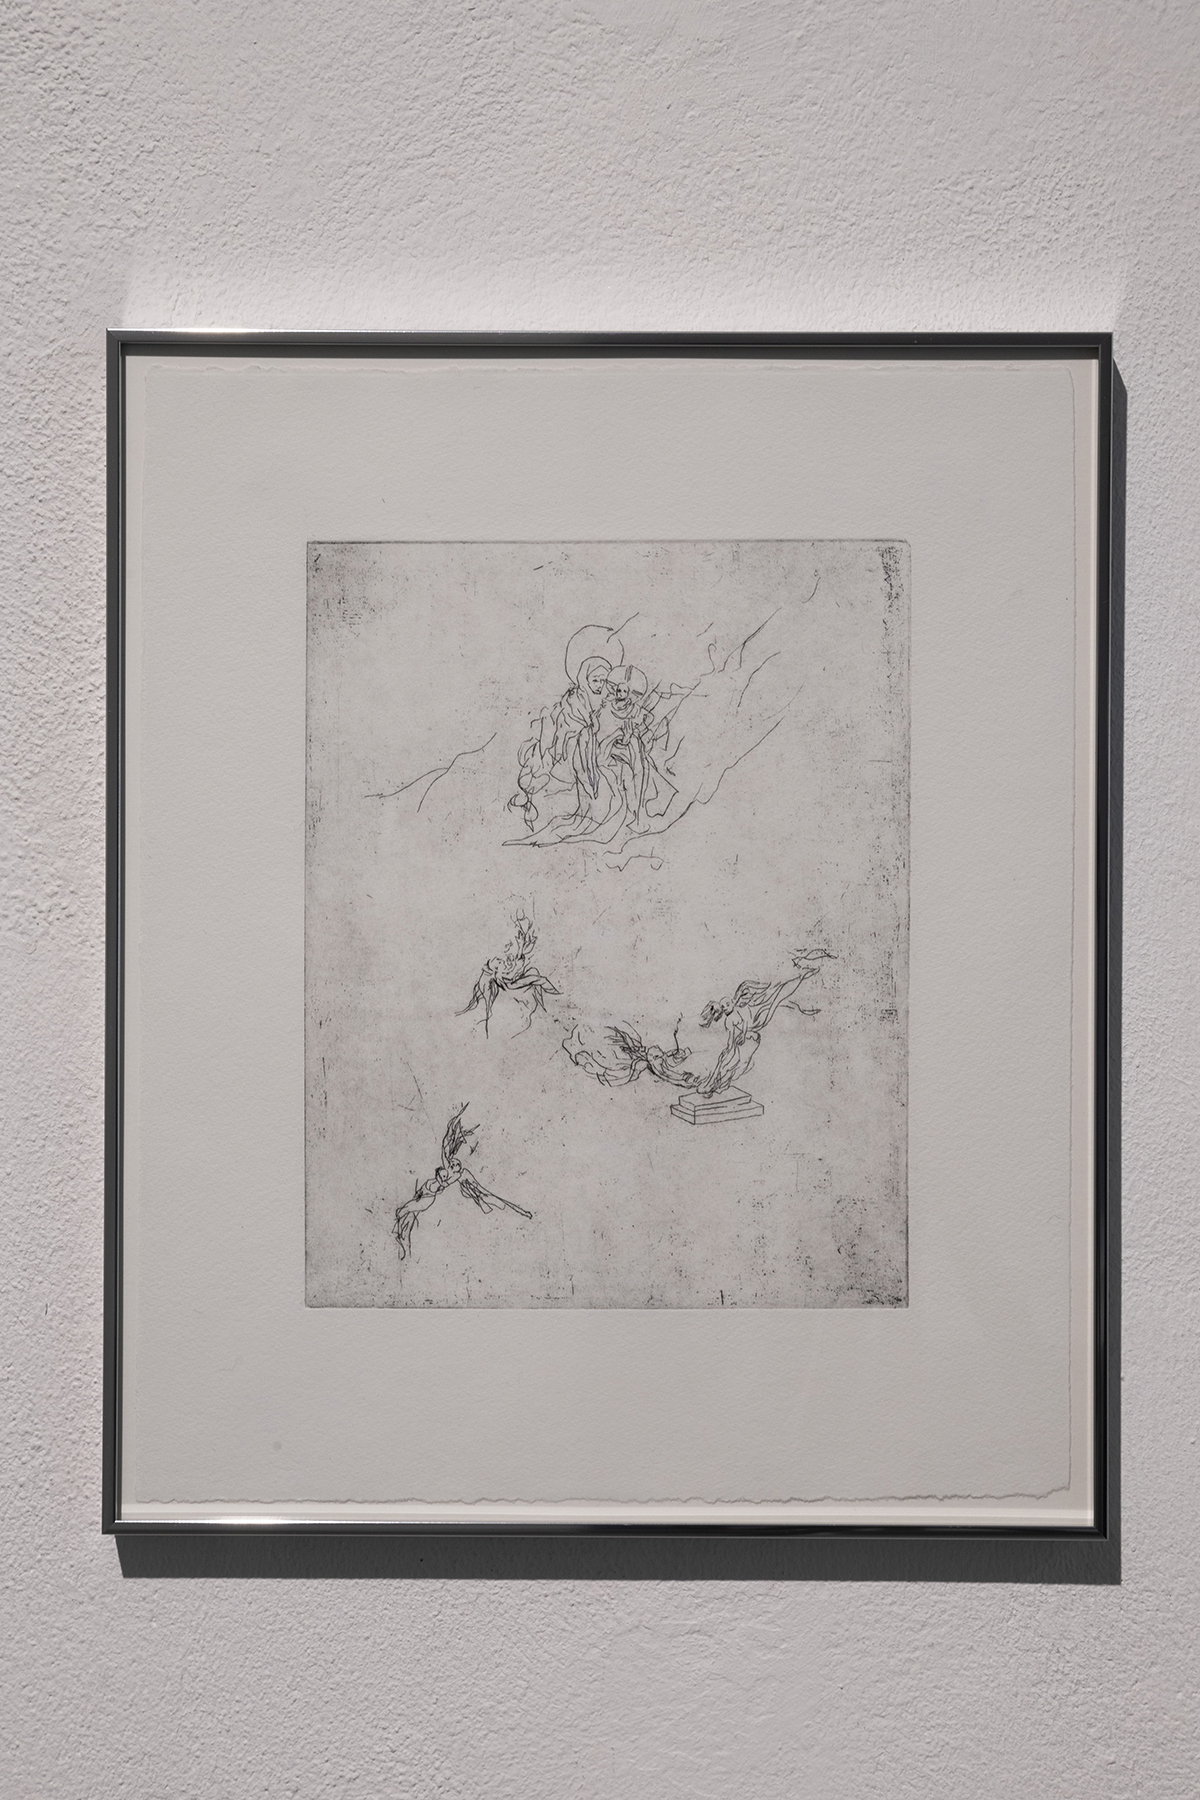 Soyon Jung, Katerina (study), 2020, Etching on handmade paper in aluminum frame, 24,5 × 19,5 cm